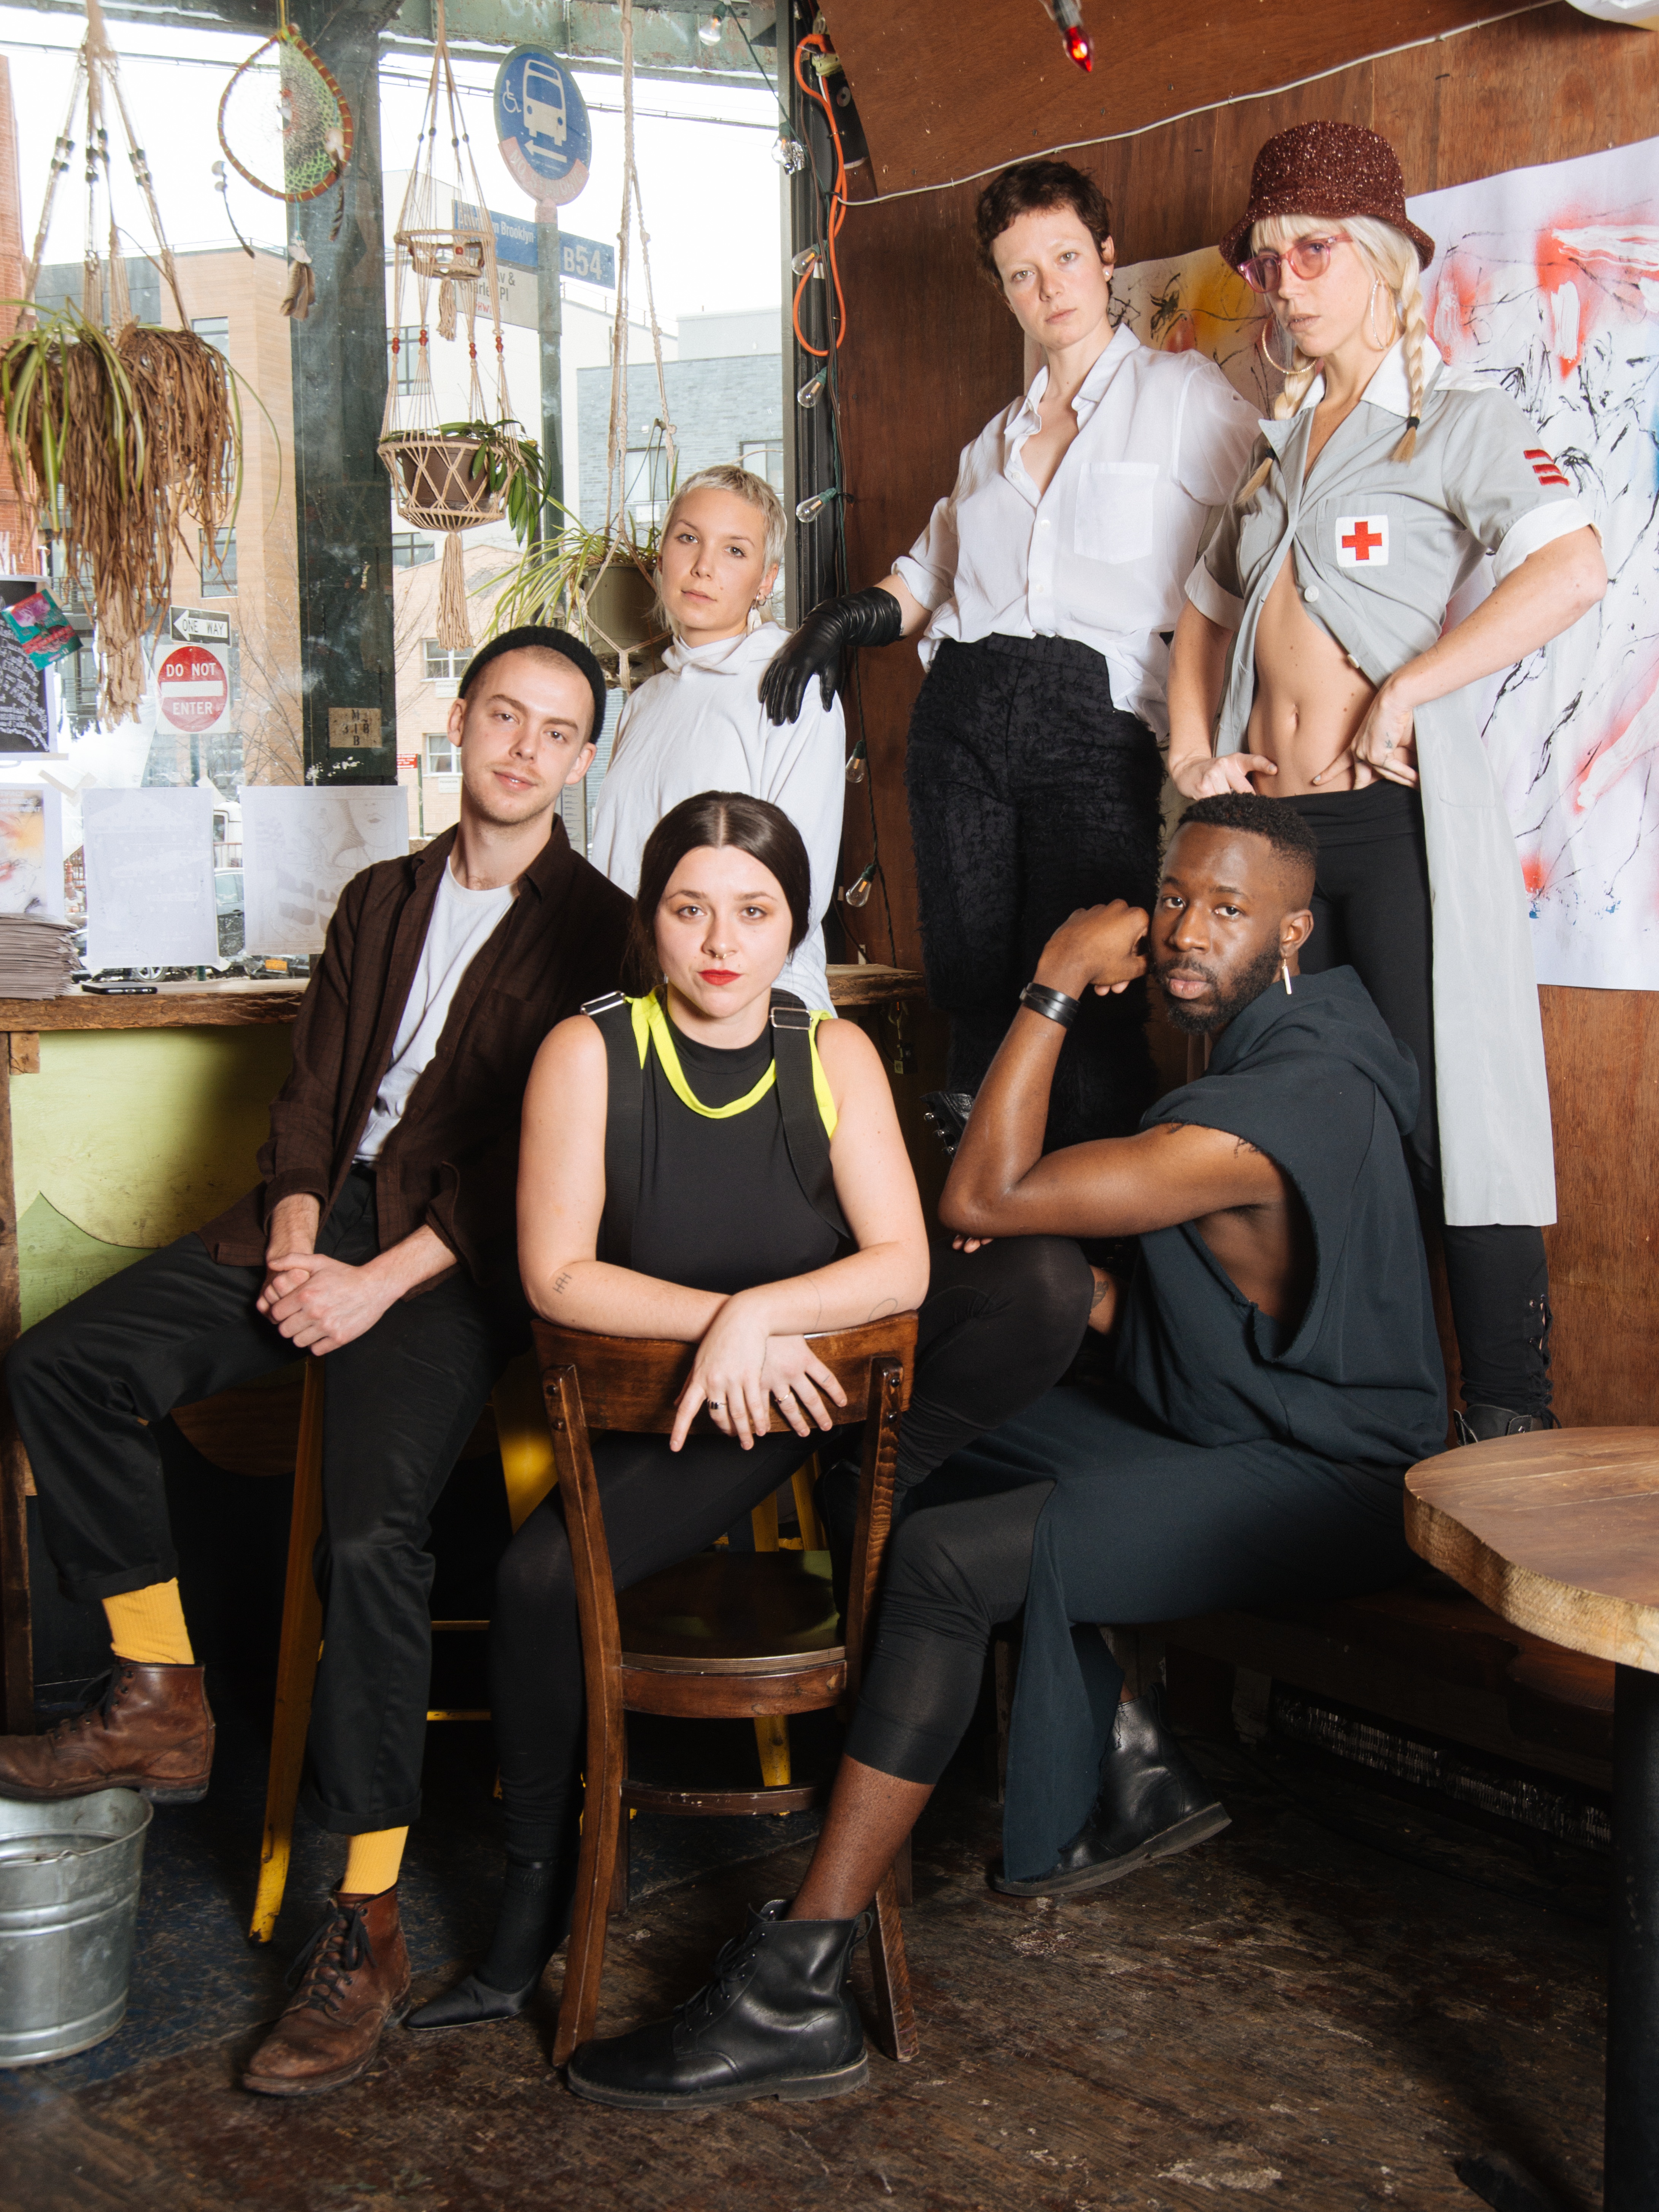 Styling by David Casavant. Clockwise from left: Bryan Keller, Hayley Martell, Kathleen Dycaico, Sigrid Lauren, Jerome Bwire and Monica Mirabile. 